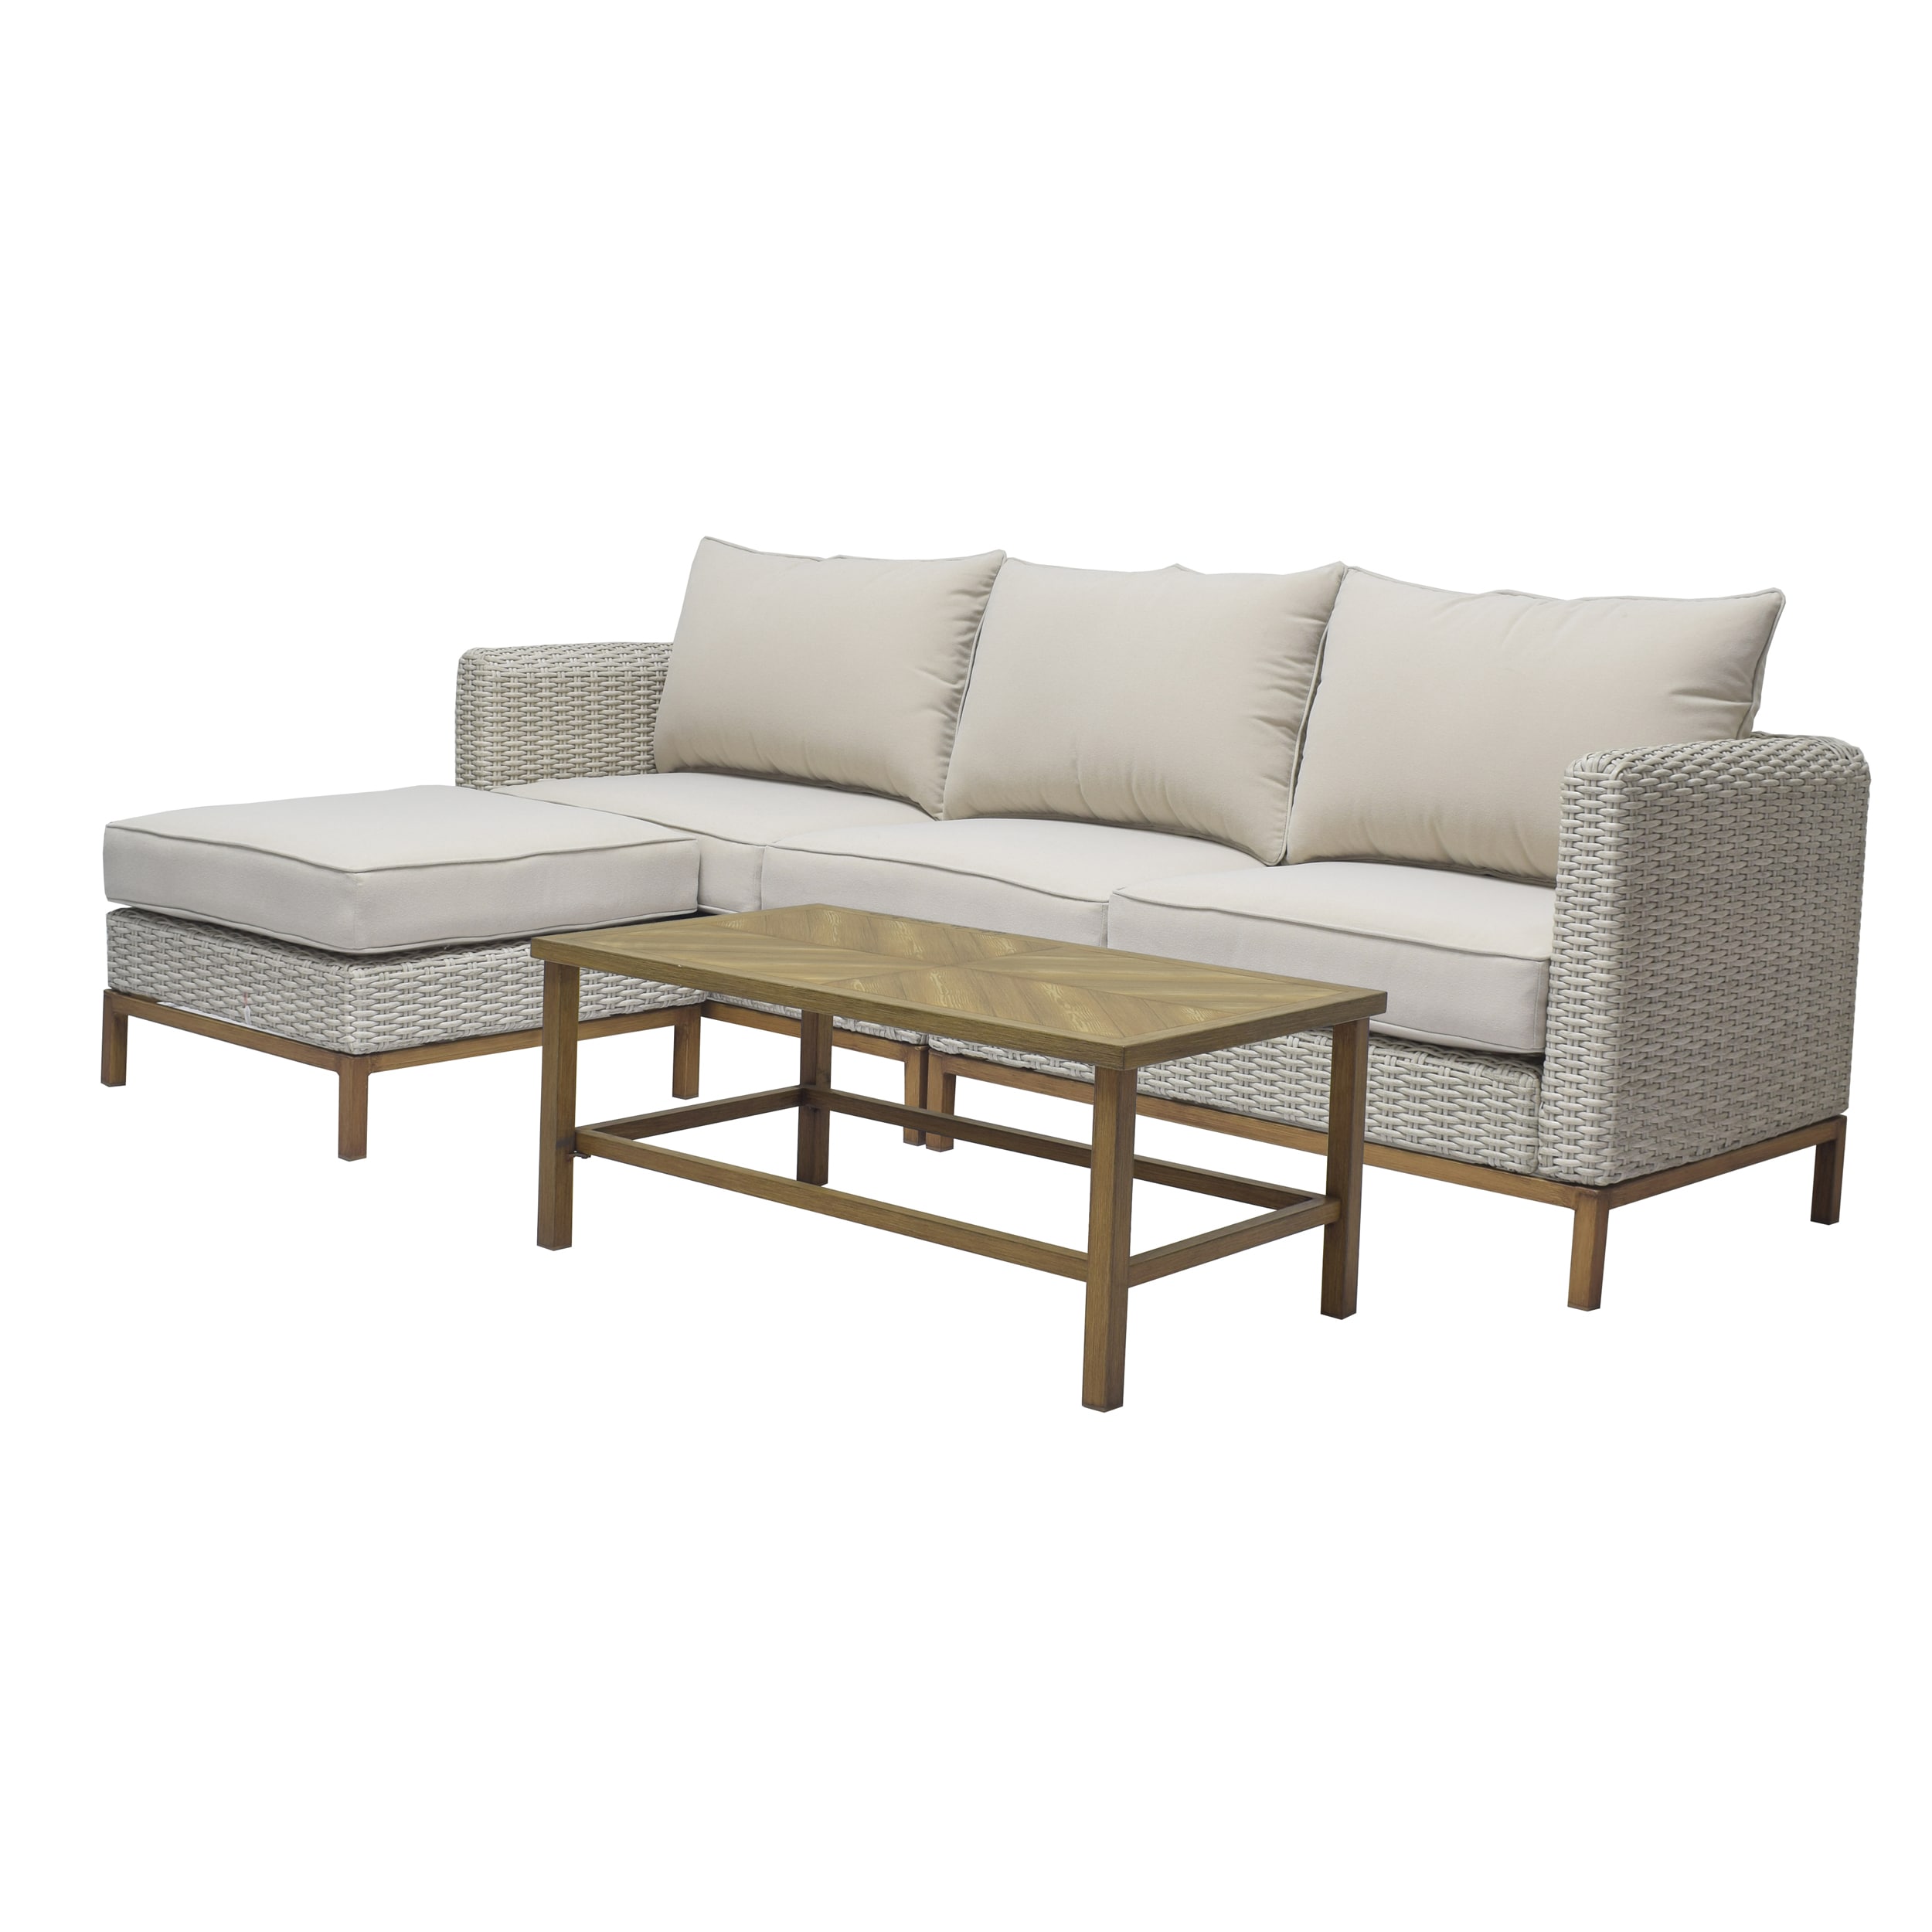 Origin 21 Set the Sets Springs Conversation Conversation Off-white Patio with at Wicker in Cushions Patio 4-Piece department Veda